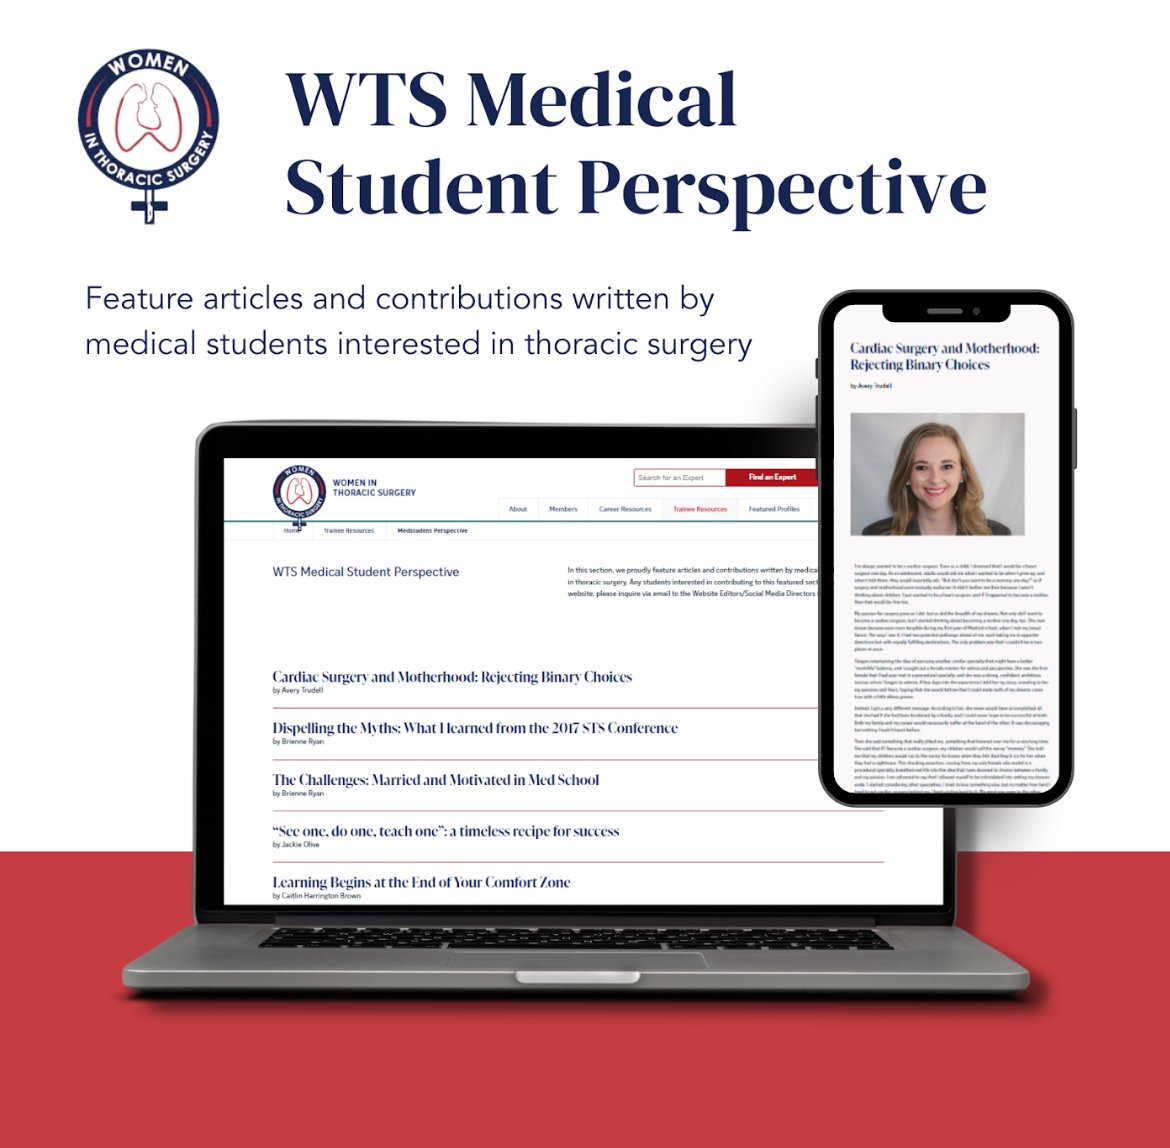 #WTS is proud to feature articles from #MedStudents interested in #CTSurgery. To read these women’s perspectives, visit: wtsnet.org/trainee-resour… For any students interested in contributing, email Dr. Mara Antonoff at maraantonoff@me.com. #WomenInMedicine #ILookLikeASurgeon